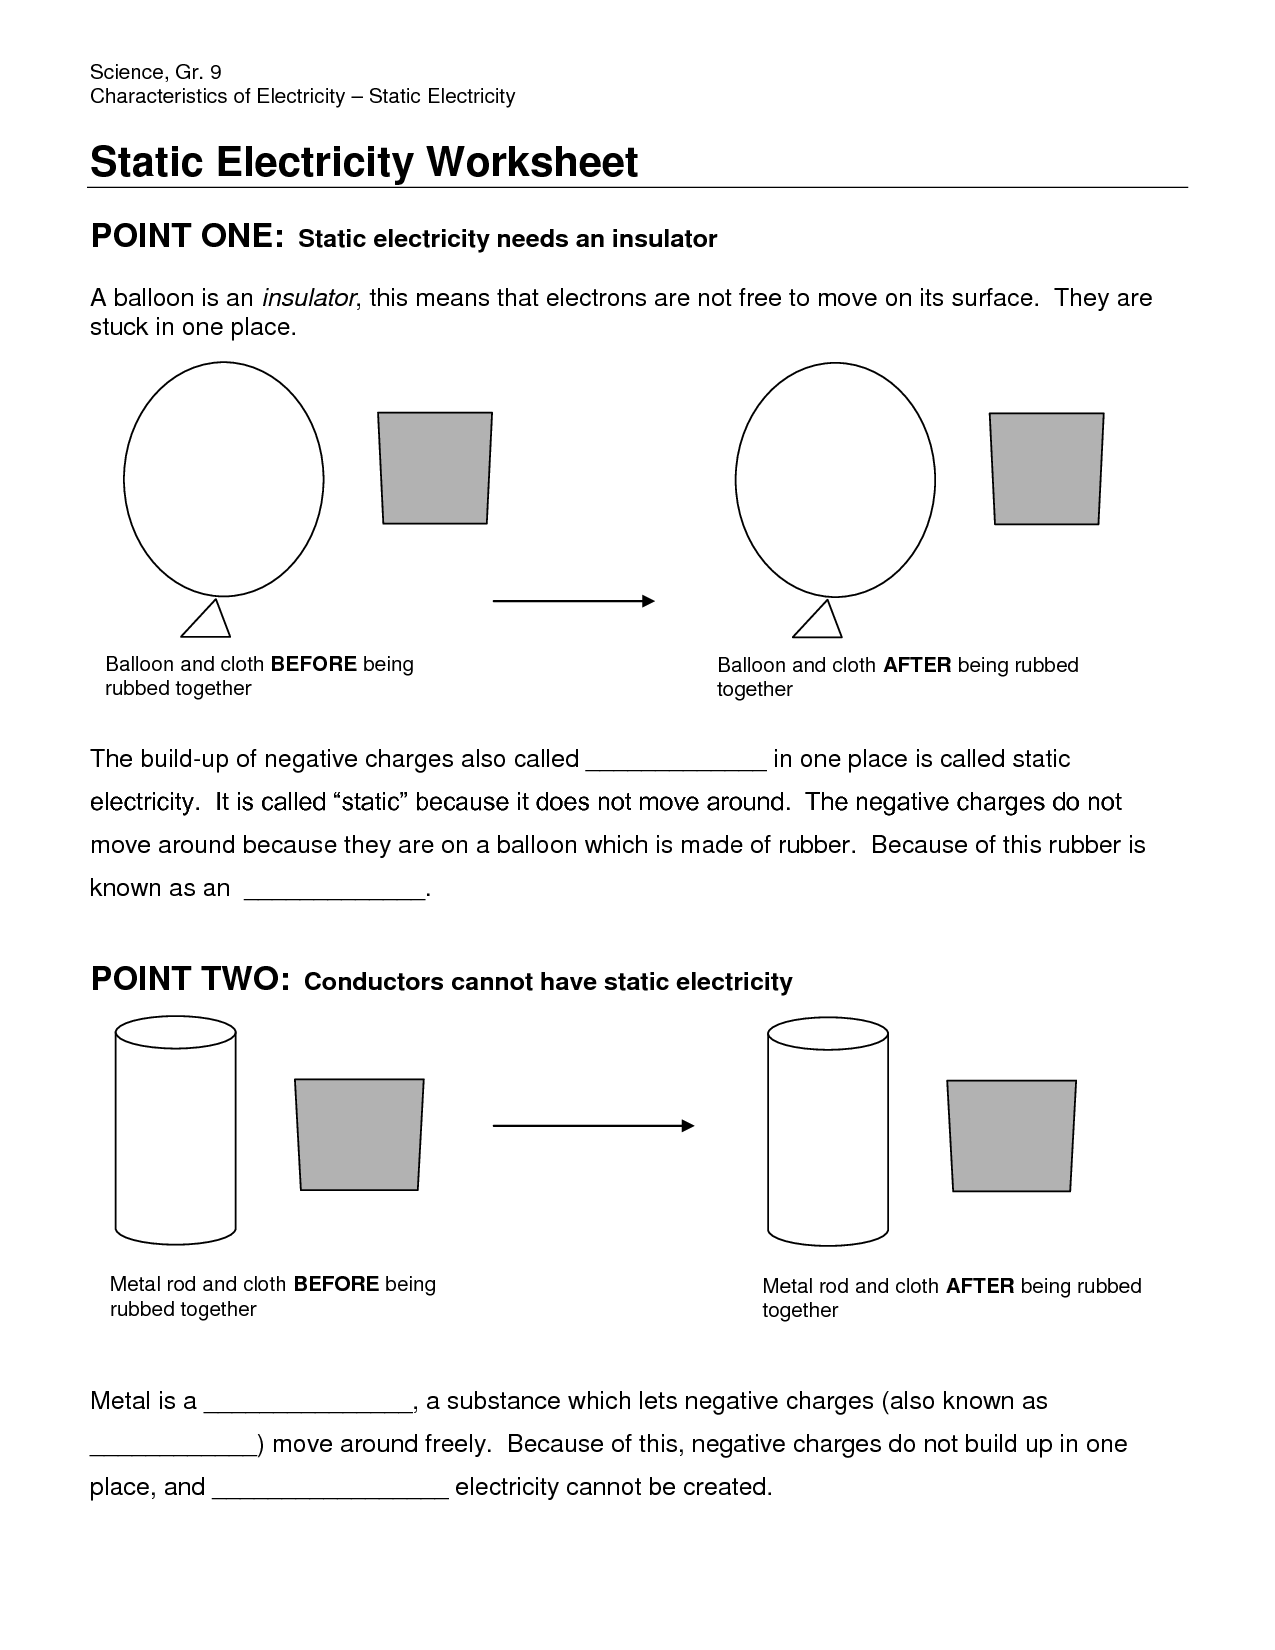 static-electricity-worksheet